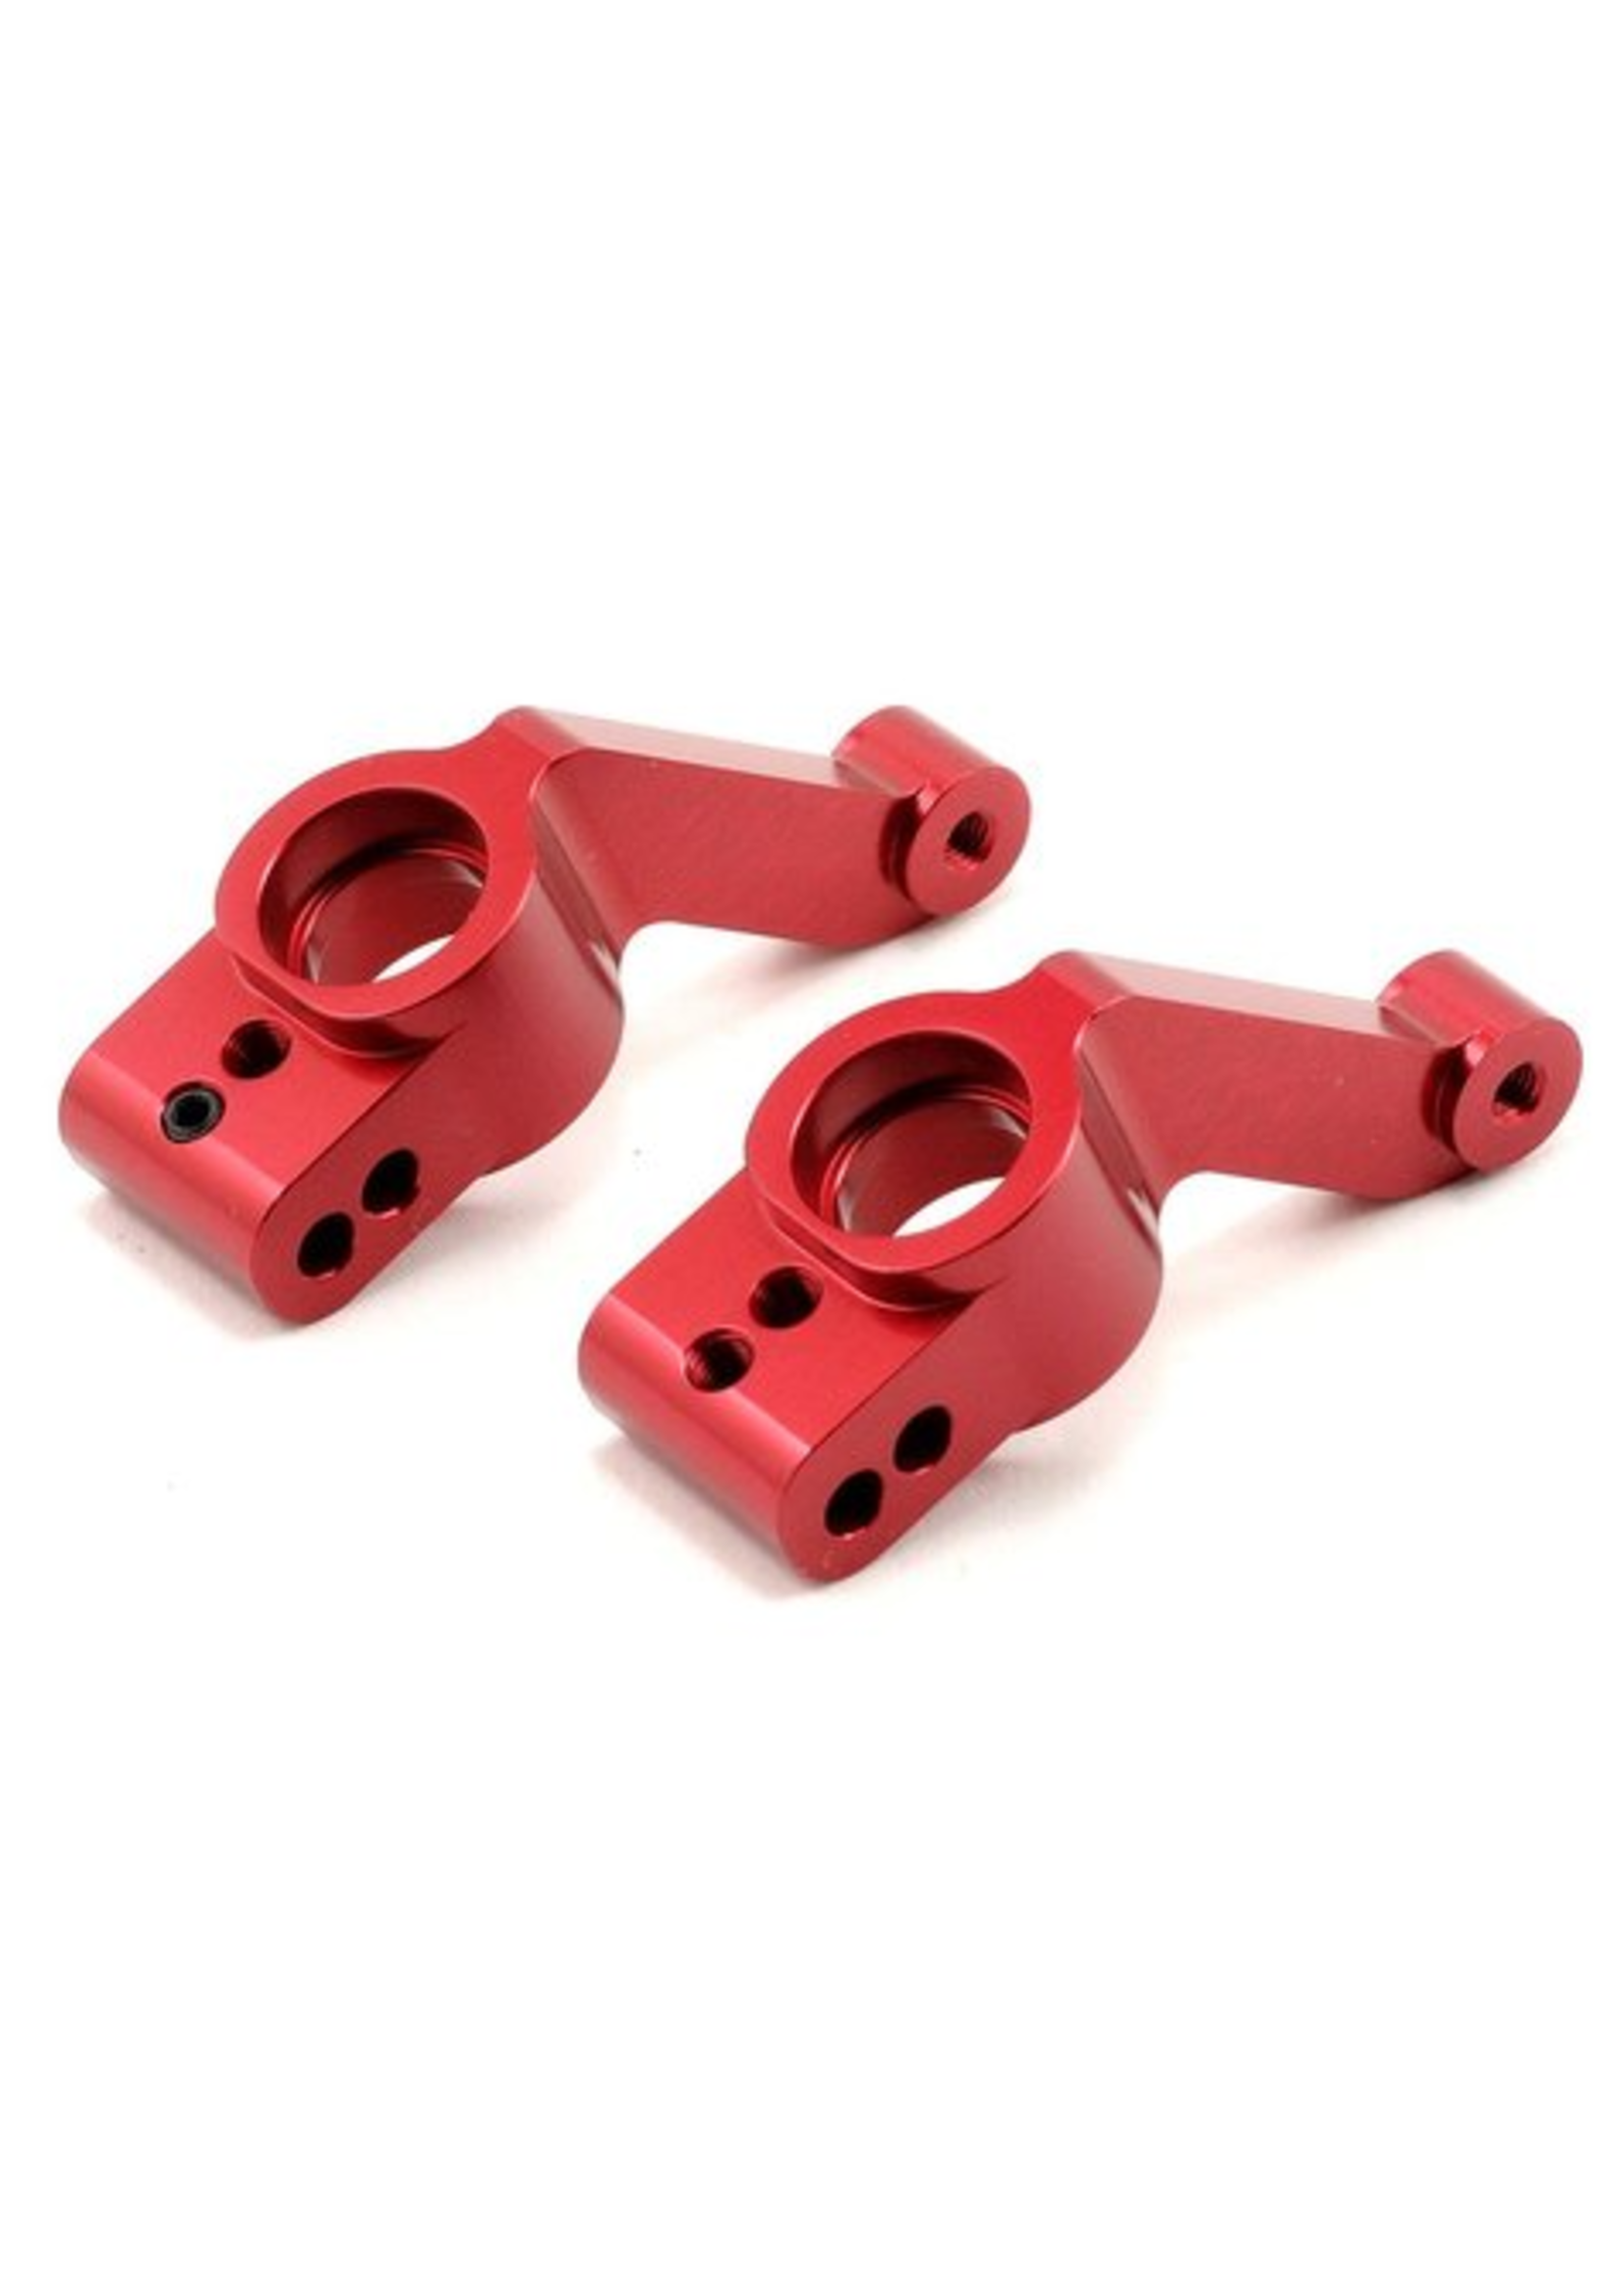 ST Racing Concepts SPTST1952R ST Racing Concepts Aluminum Rear Hub Carriers For Slash 4X4 (Red)